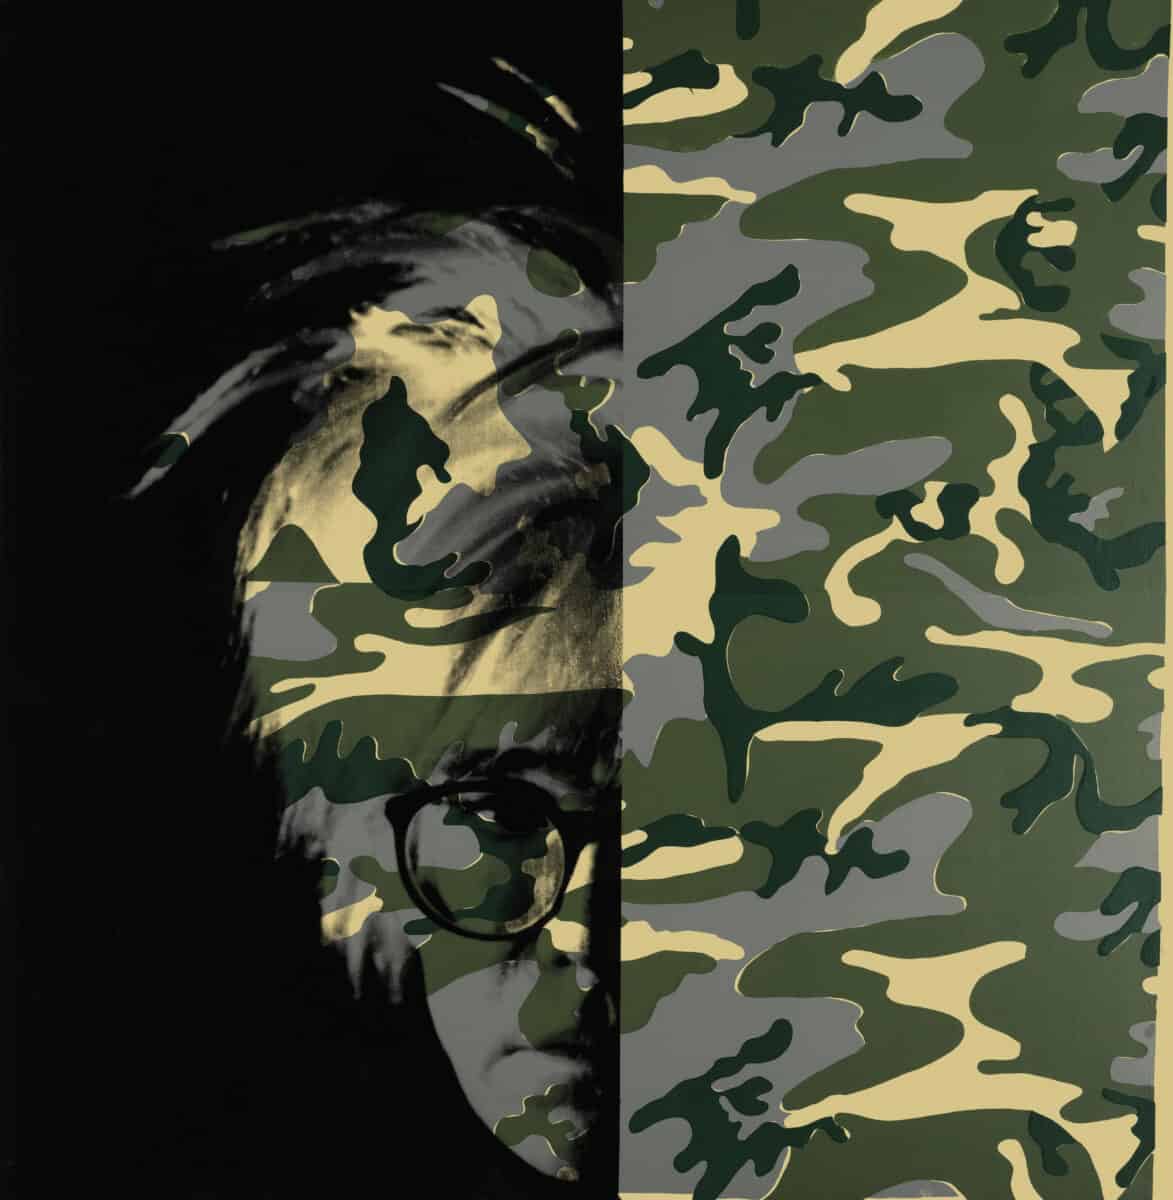 Andy Warhol Self-Portrait (Camouflage), 1986 © 2023 Andy Warhol Foundation for the Visual Arts, Inc. ARS/Copyright Agency.